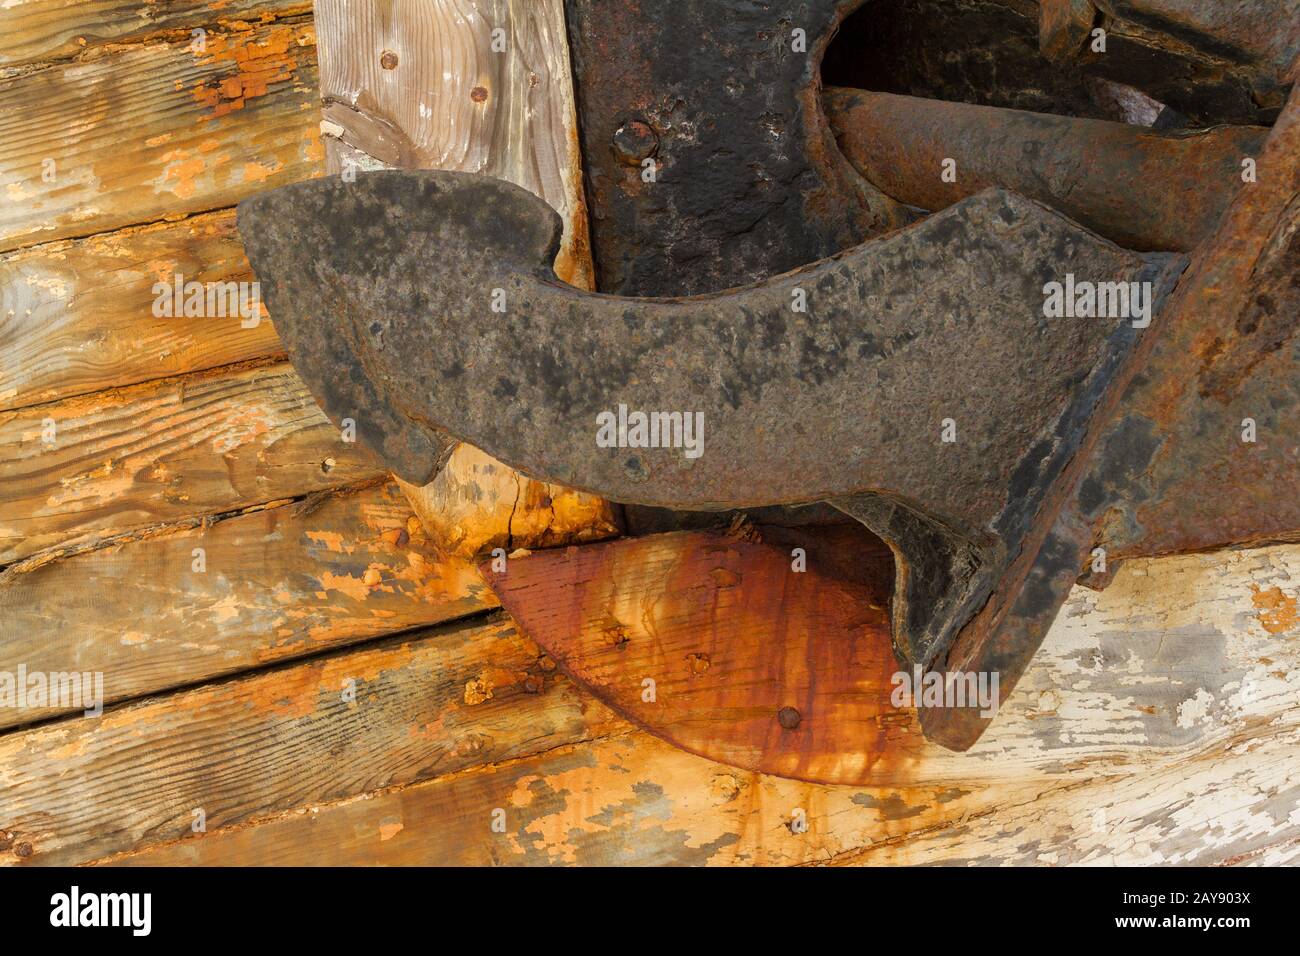 Anchor on Derelict Wooden Fishing Boat Wreck closeup Stock Photo